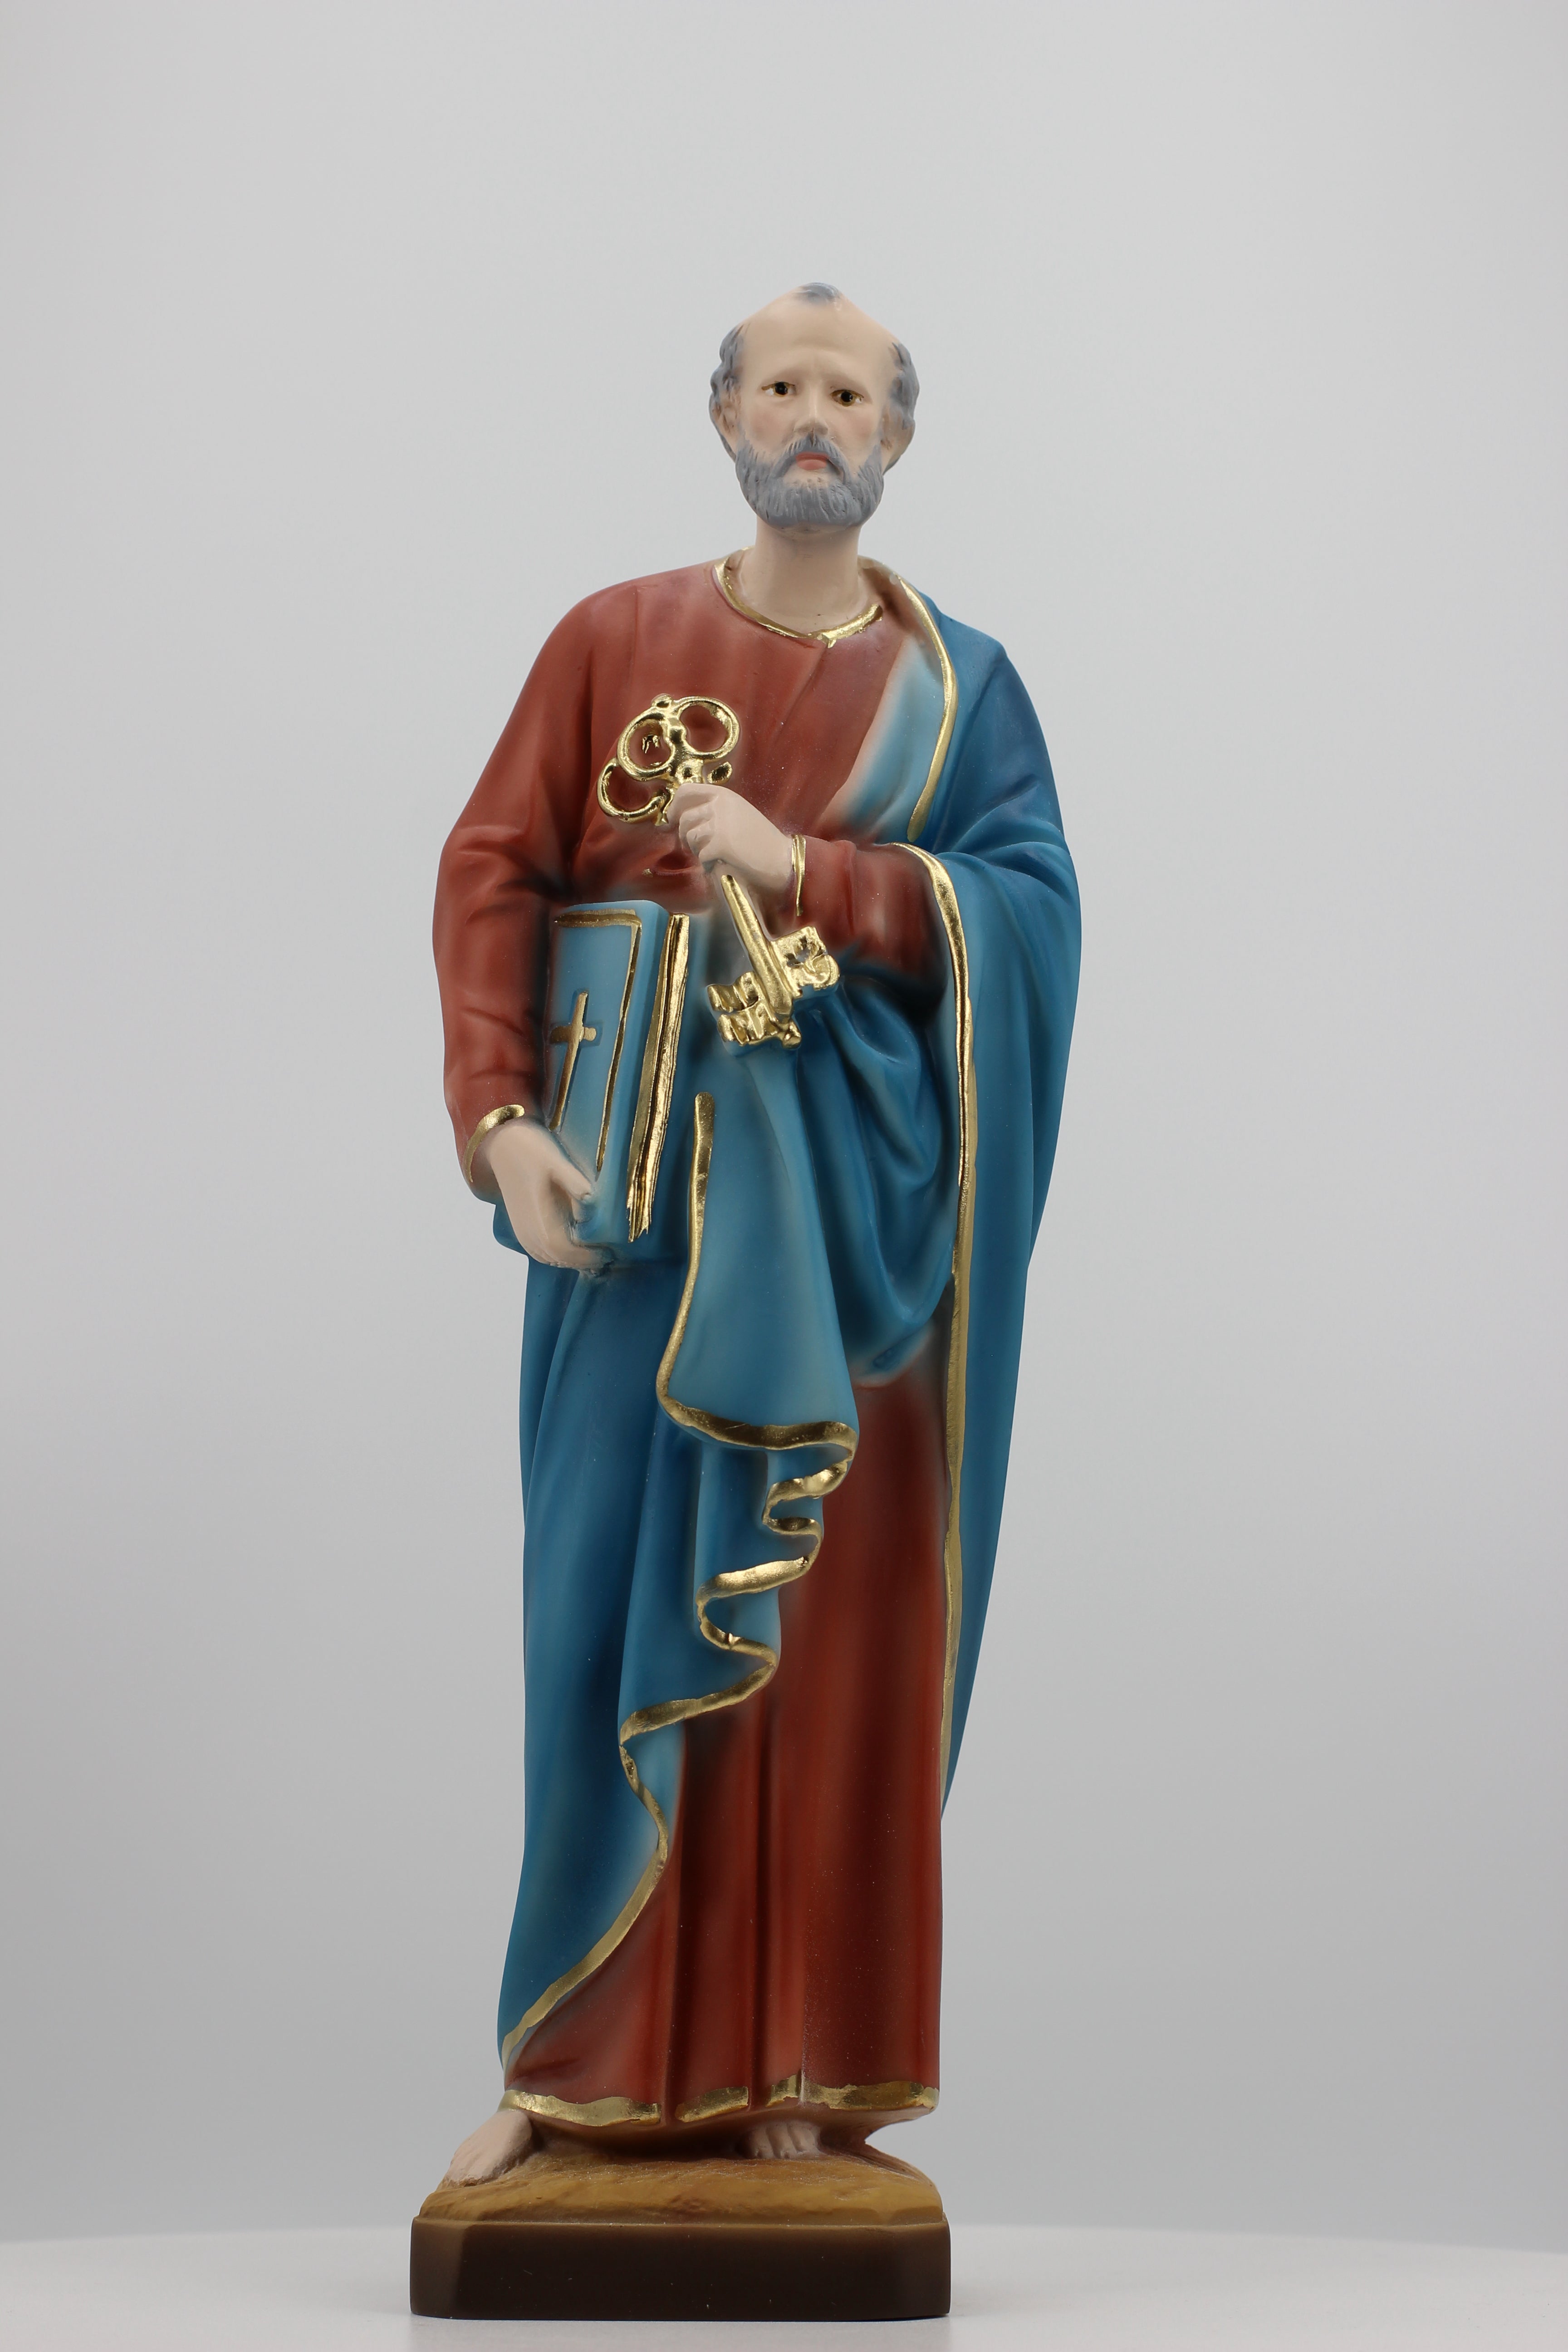 The Faith Gift  Shop Saint Peter  statue - Hand Painted in Italy - Our Tuscany Collection -Estatua de San Pedro